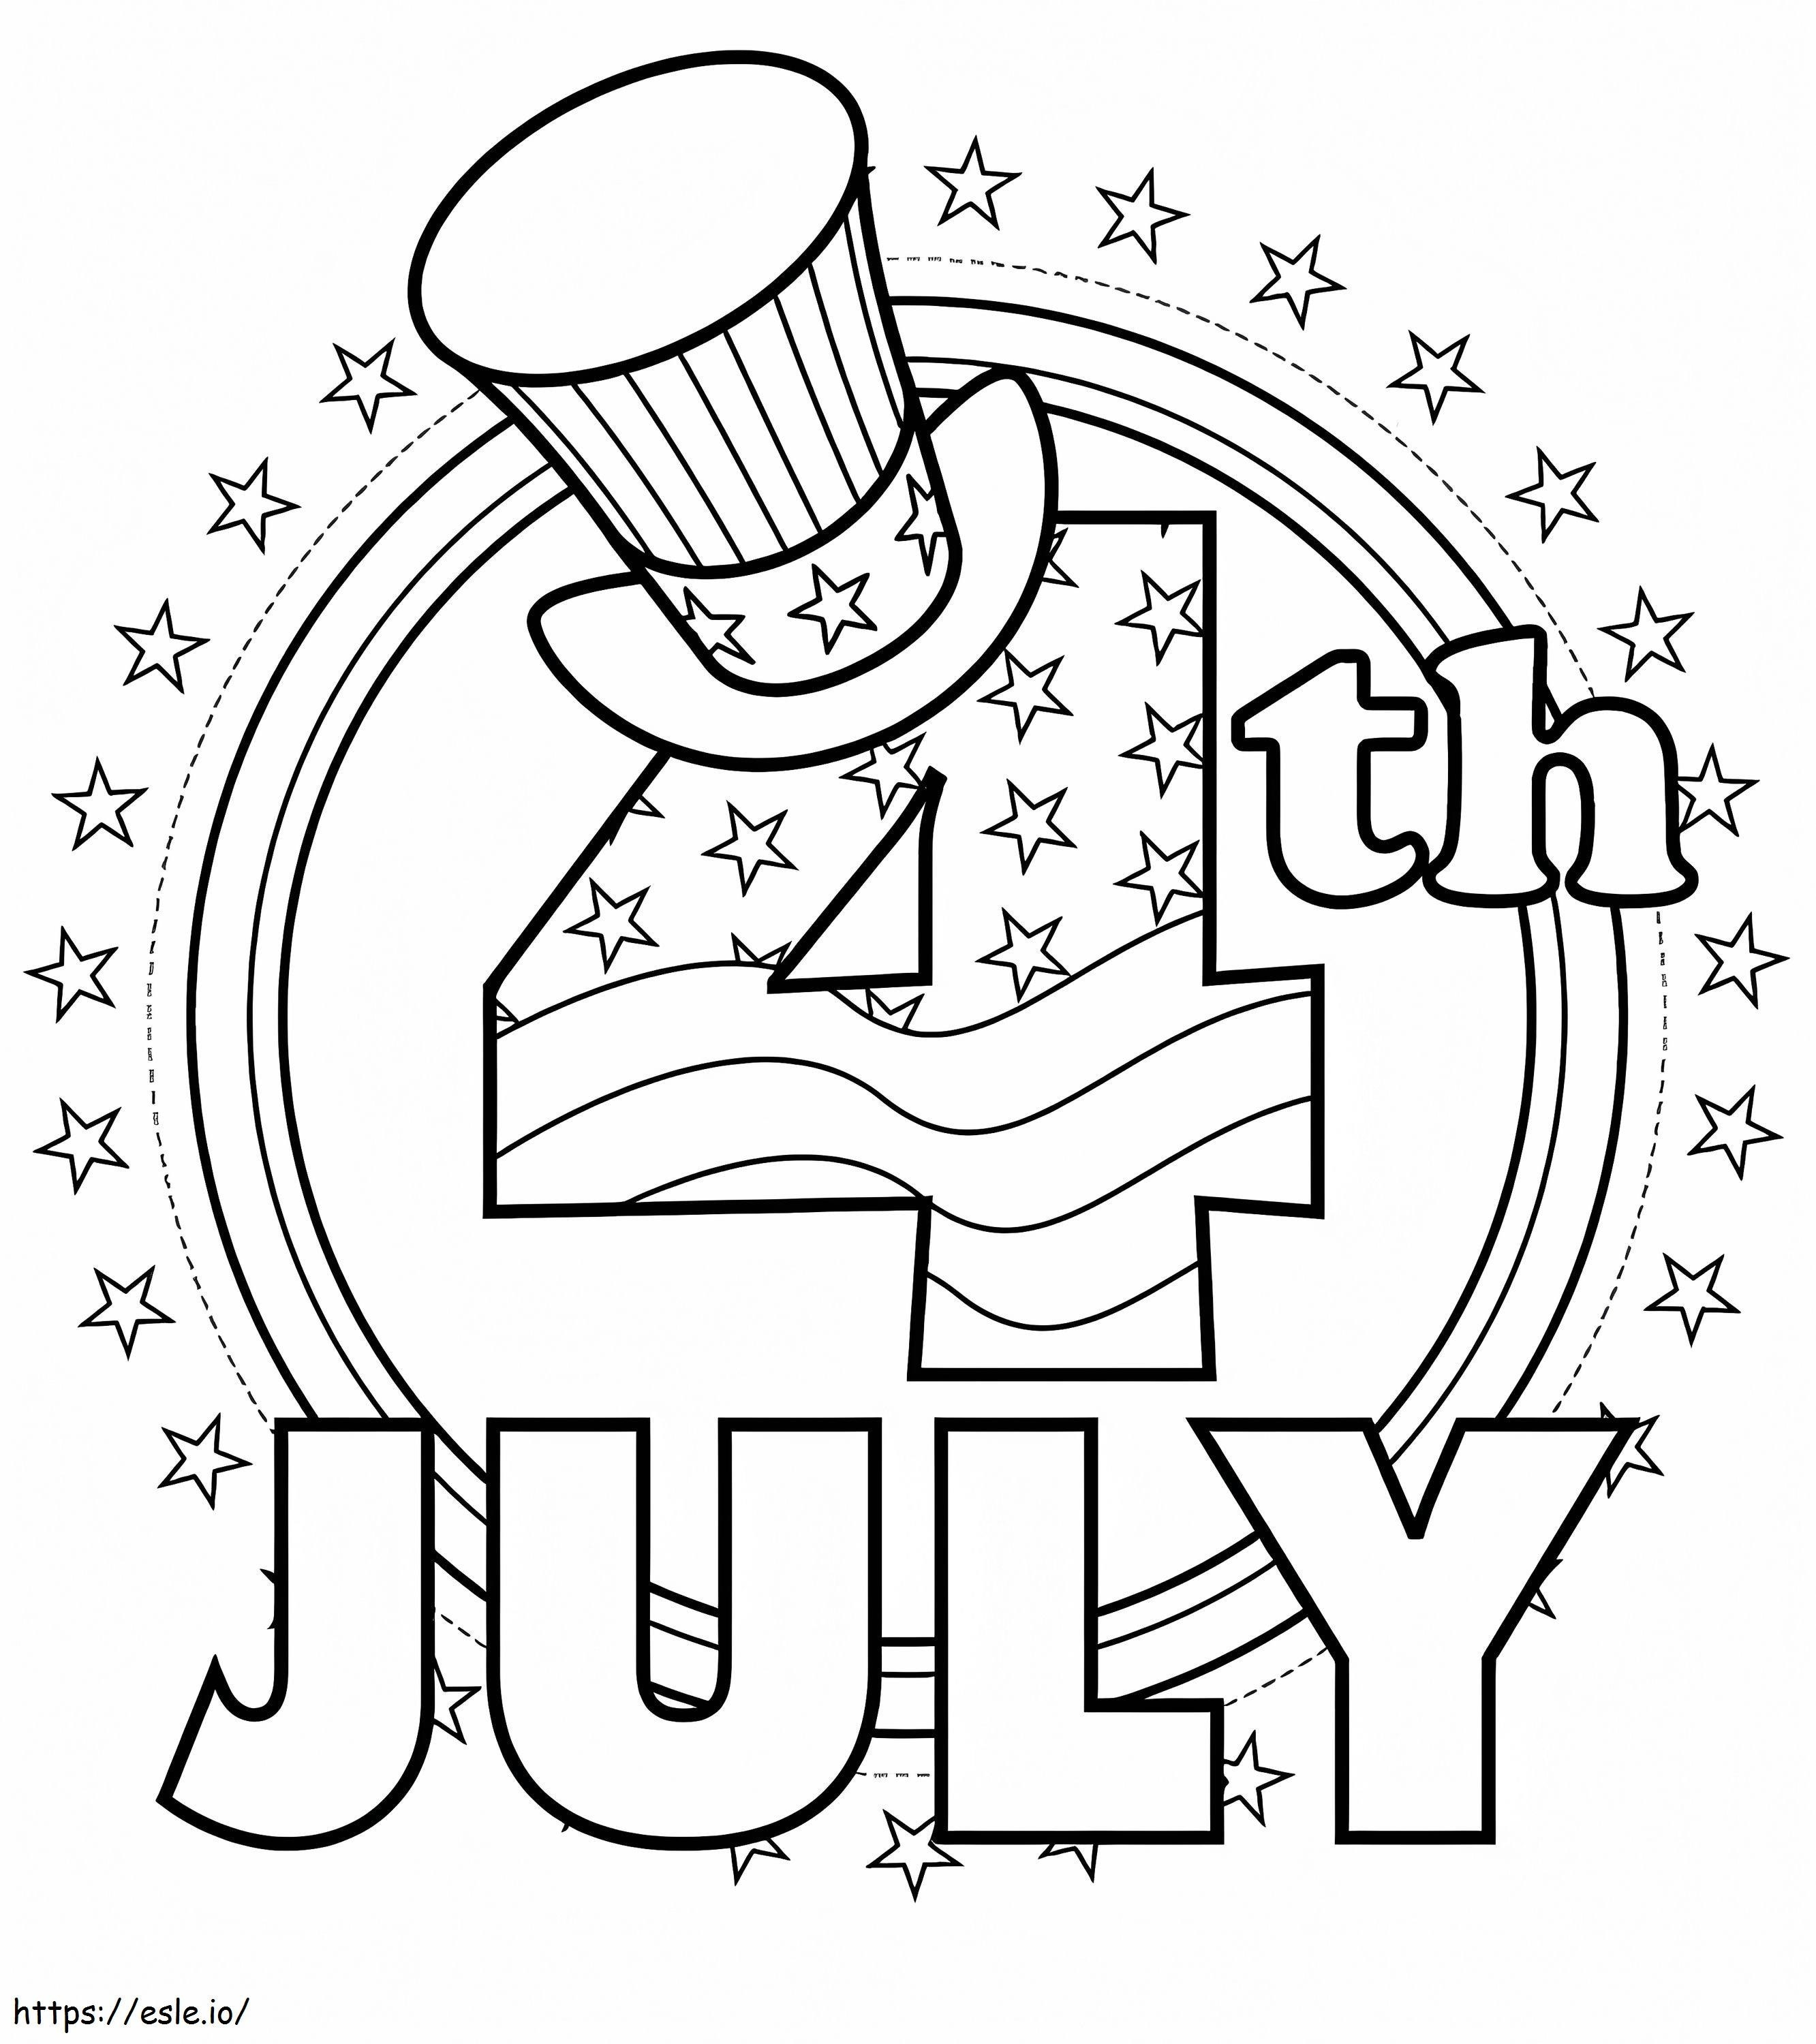 4Th Of July coloring page